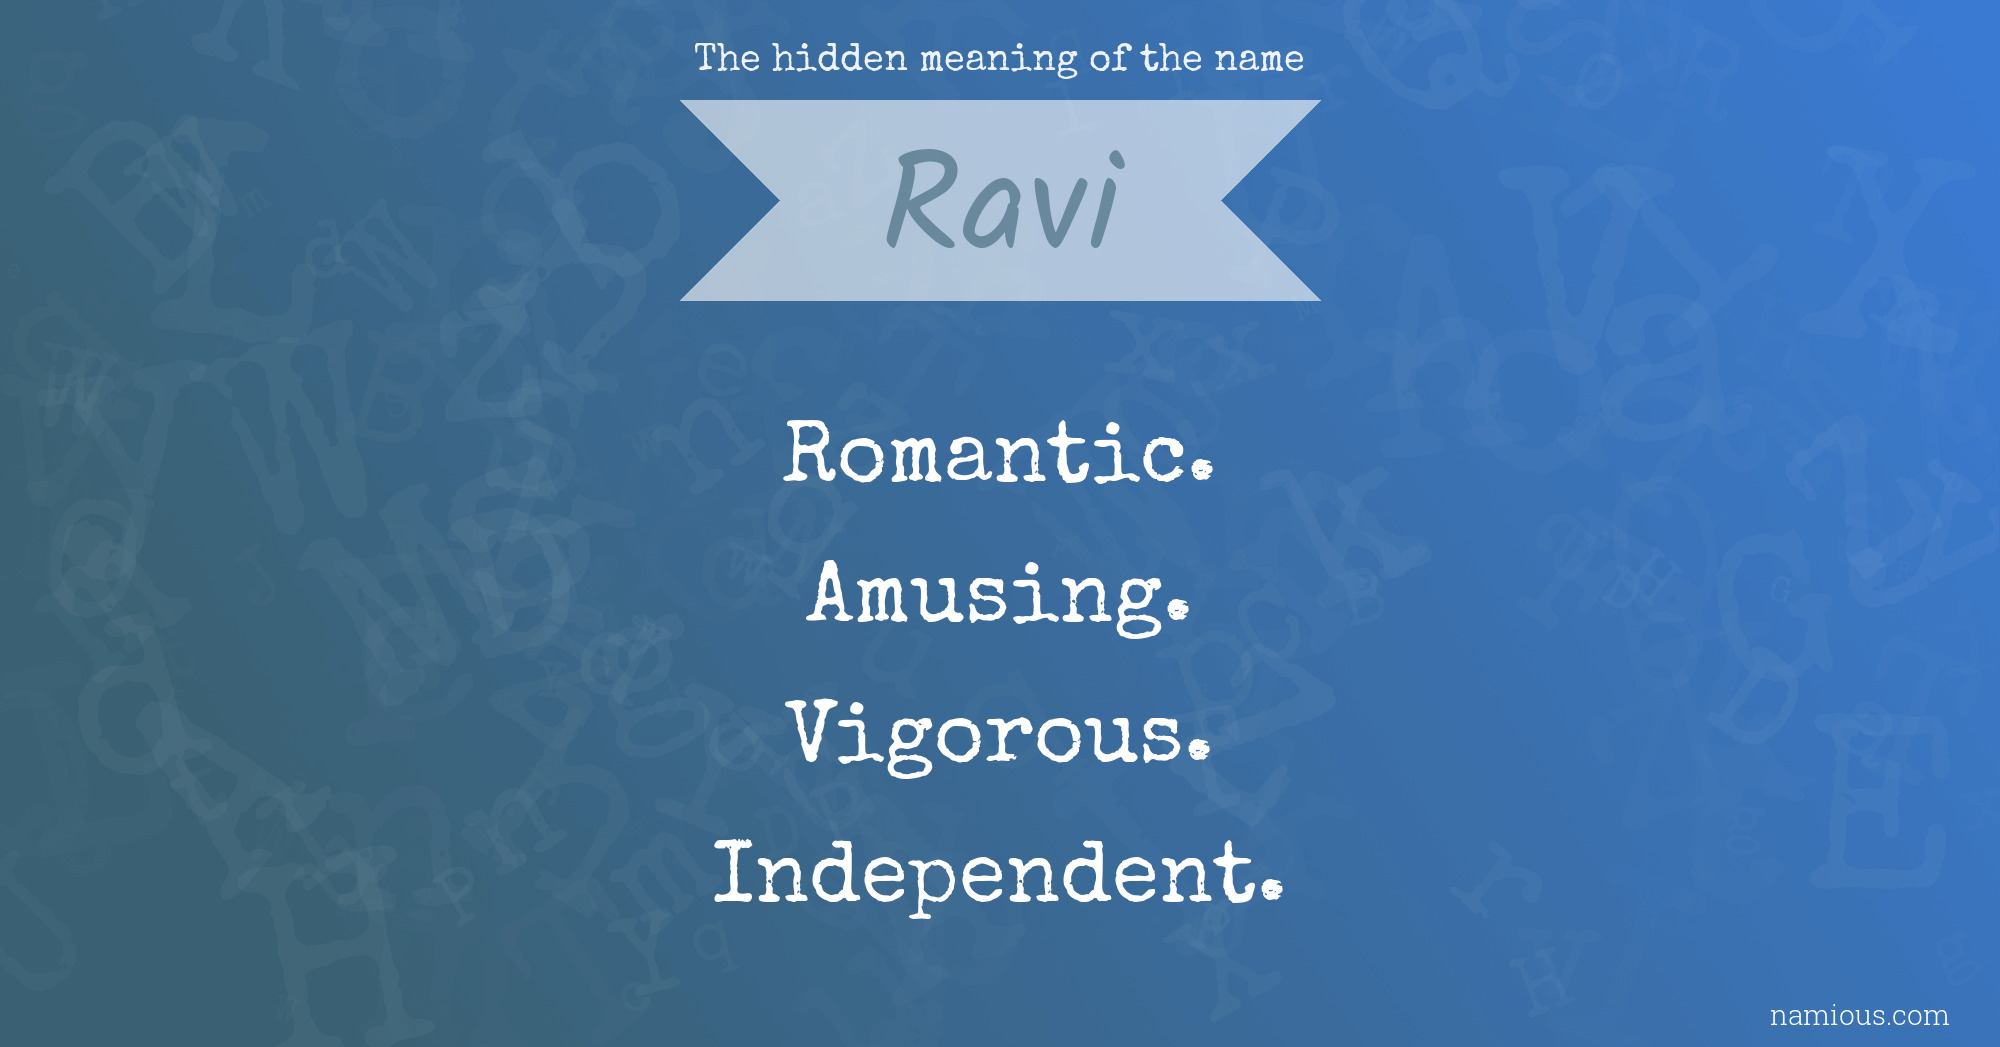 The hidden meaning of the name Ravi